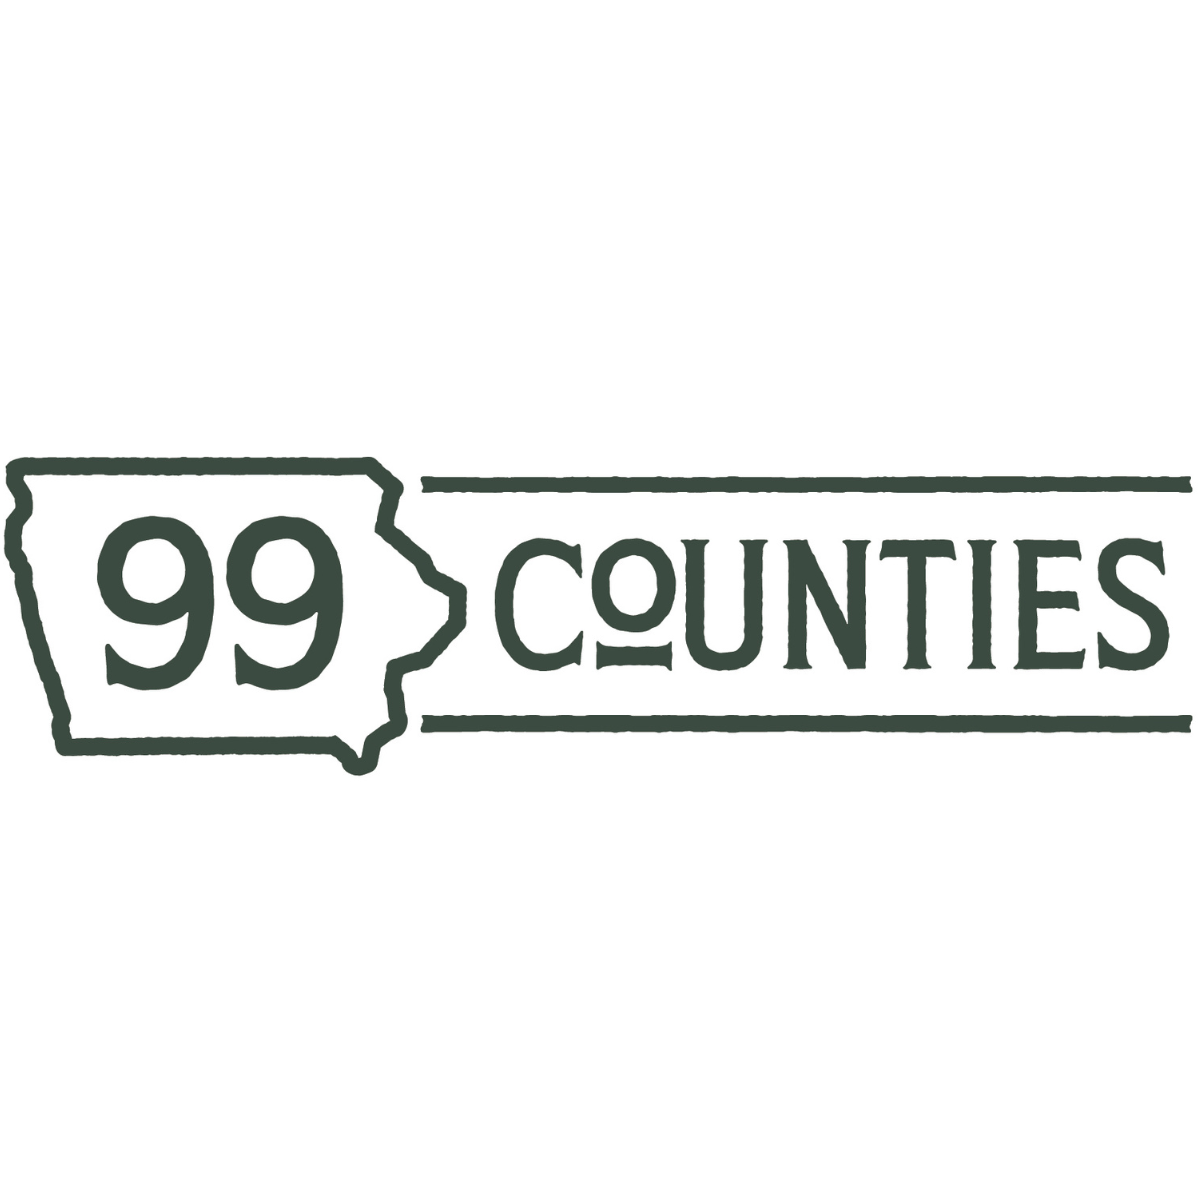 99 Counties